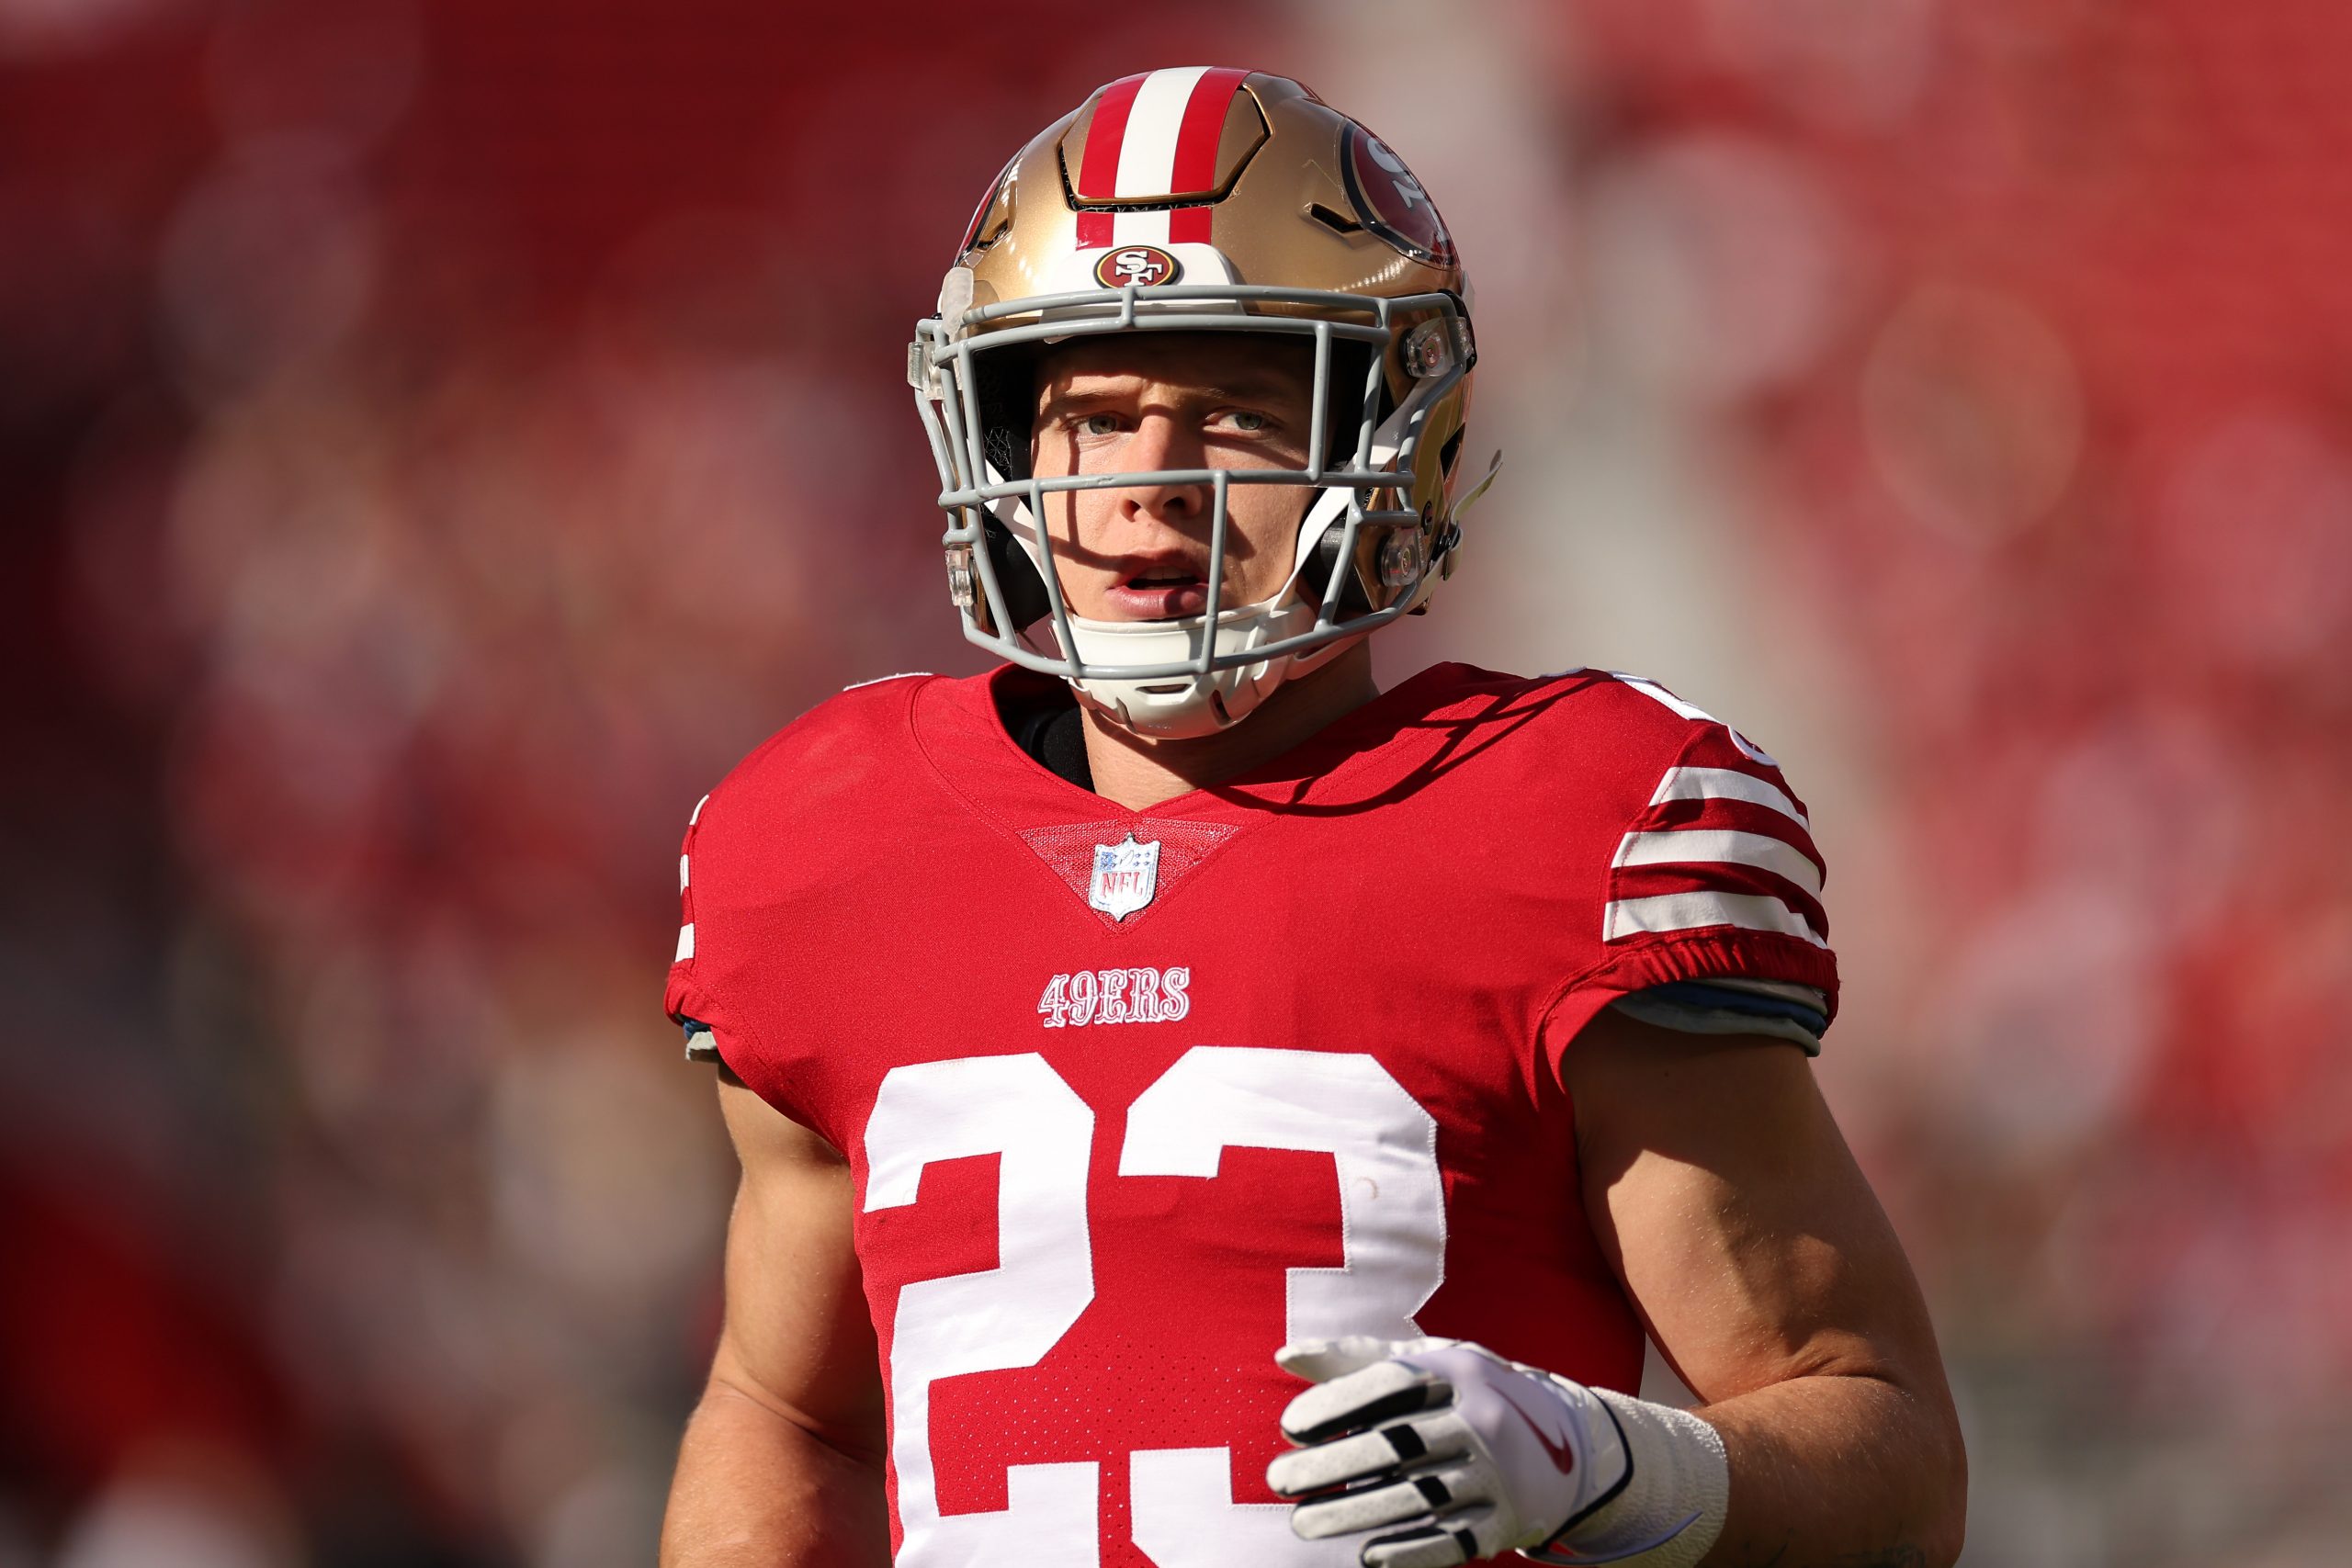 Christian McCaffrey #23 of the San Francisco 49ers warms up prior to the game against the New Orlea...